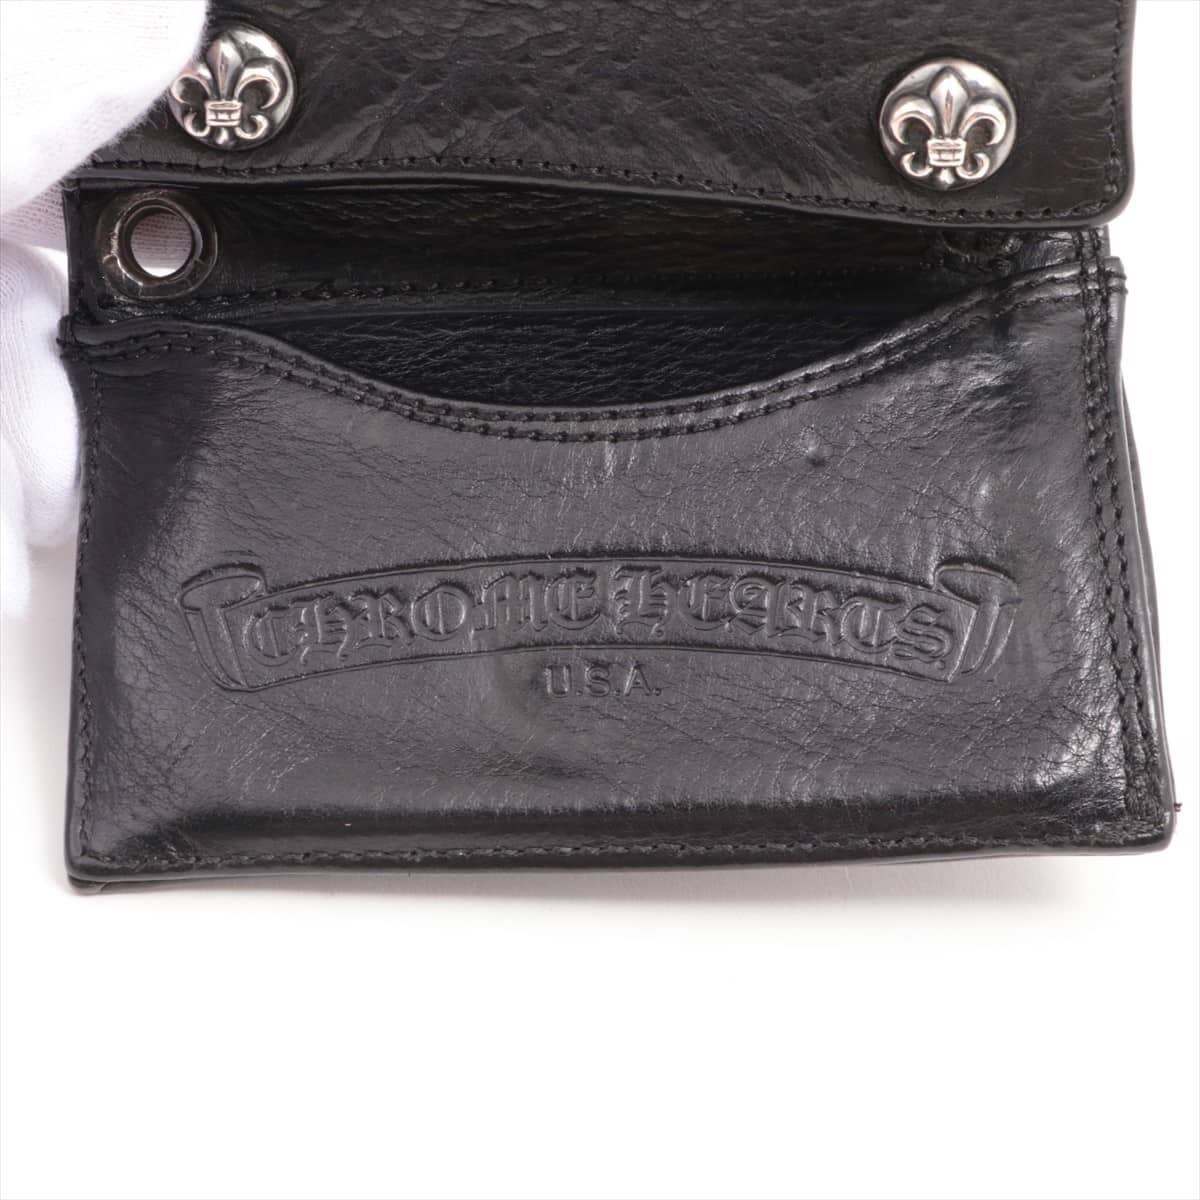 Chrome Hearts 2 Zips Wallet Leather Flare button